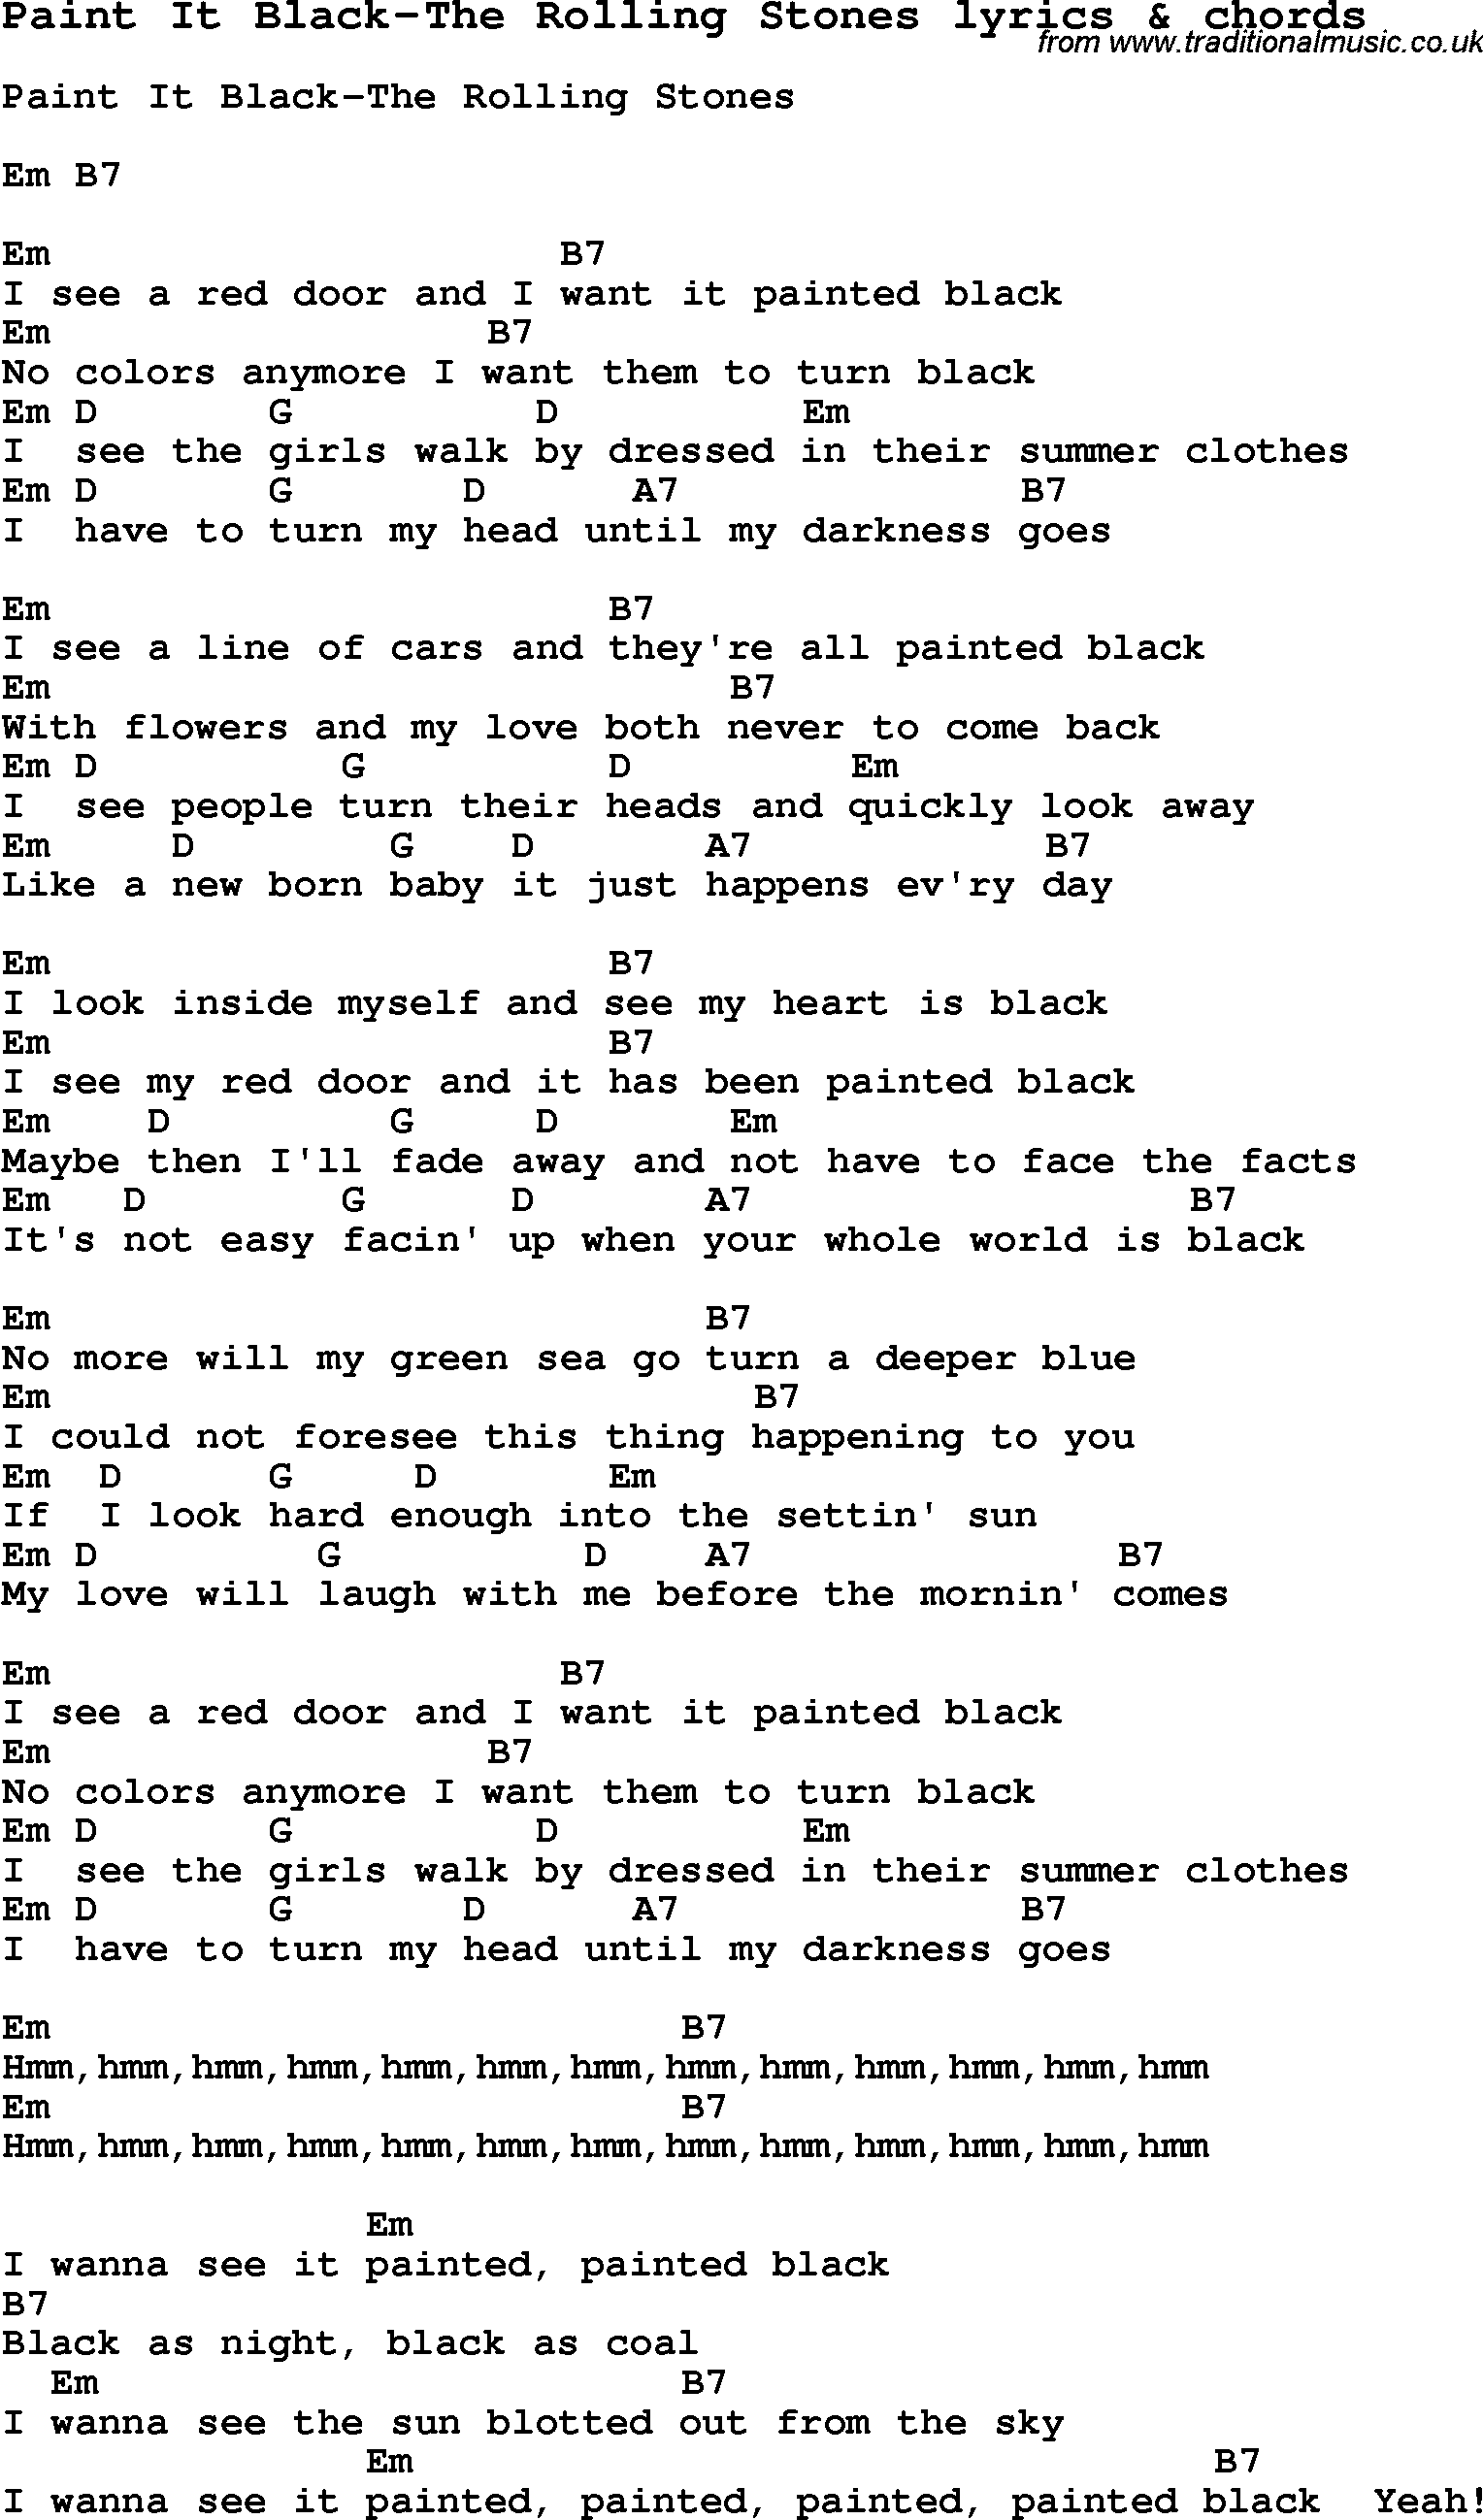 Love Song Lyrics for: Paint It Black-The Rolling Stones with chords for Ukulele, Guitar Banjo etc.